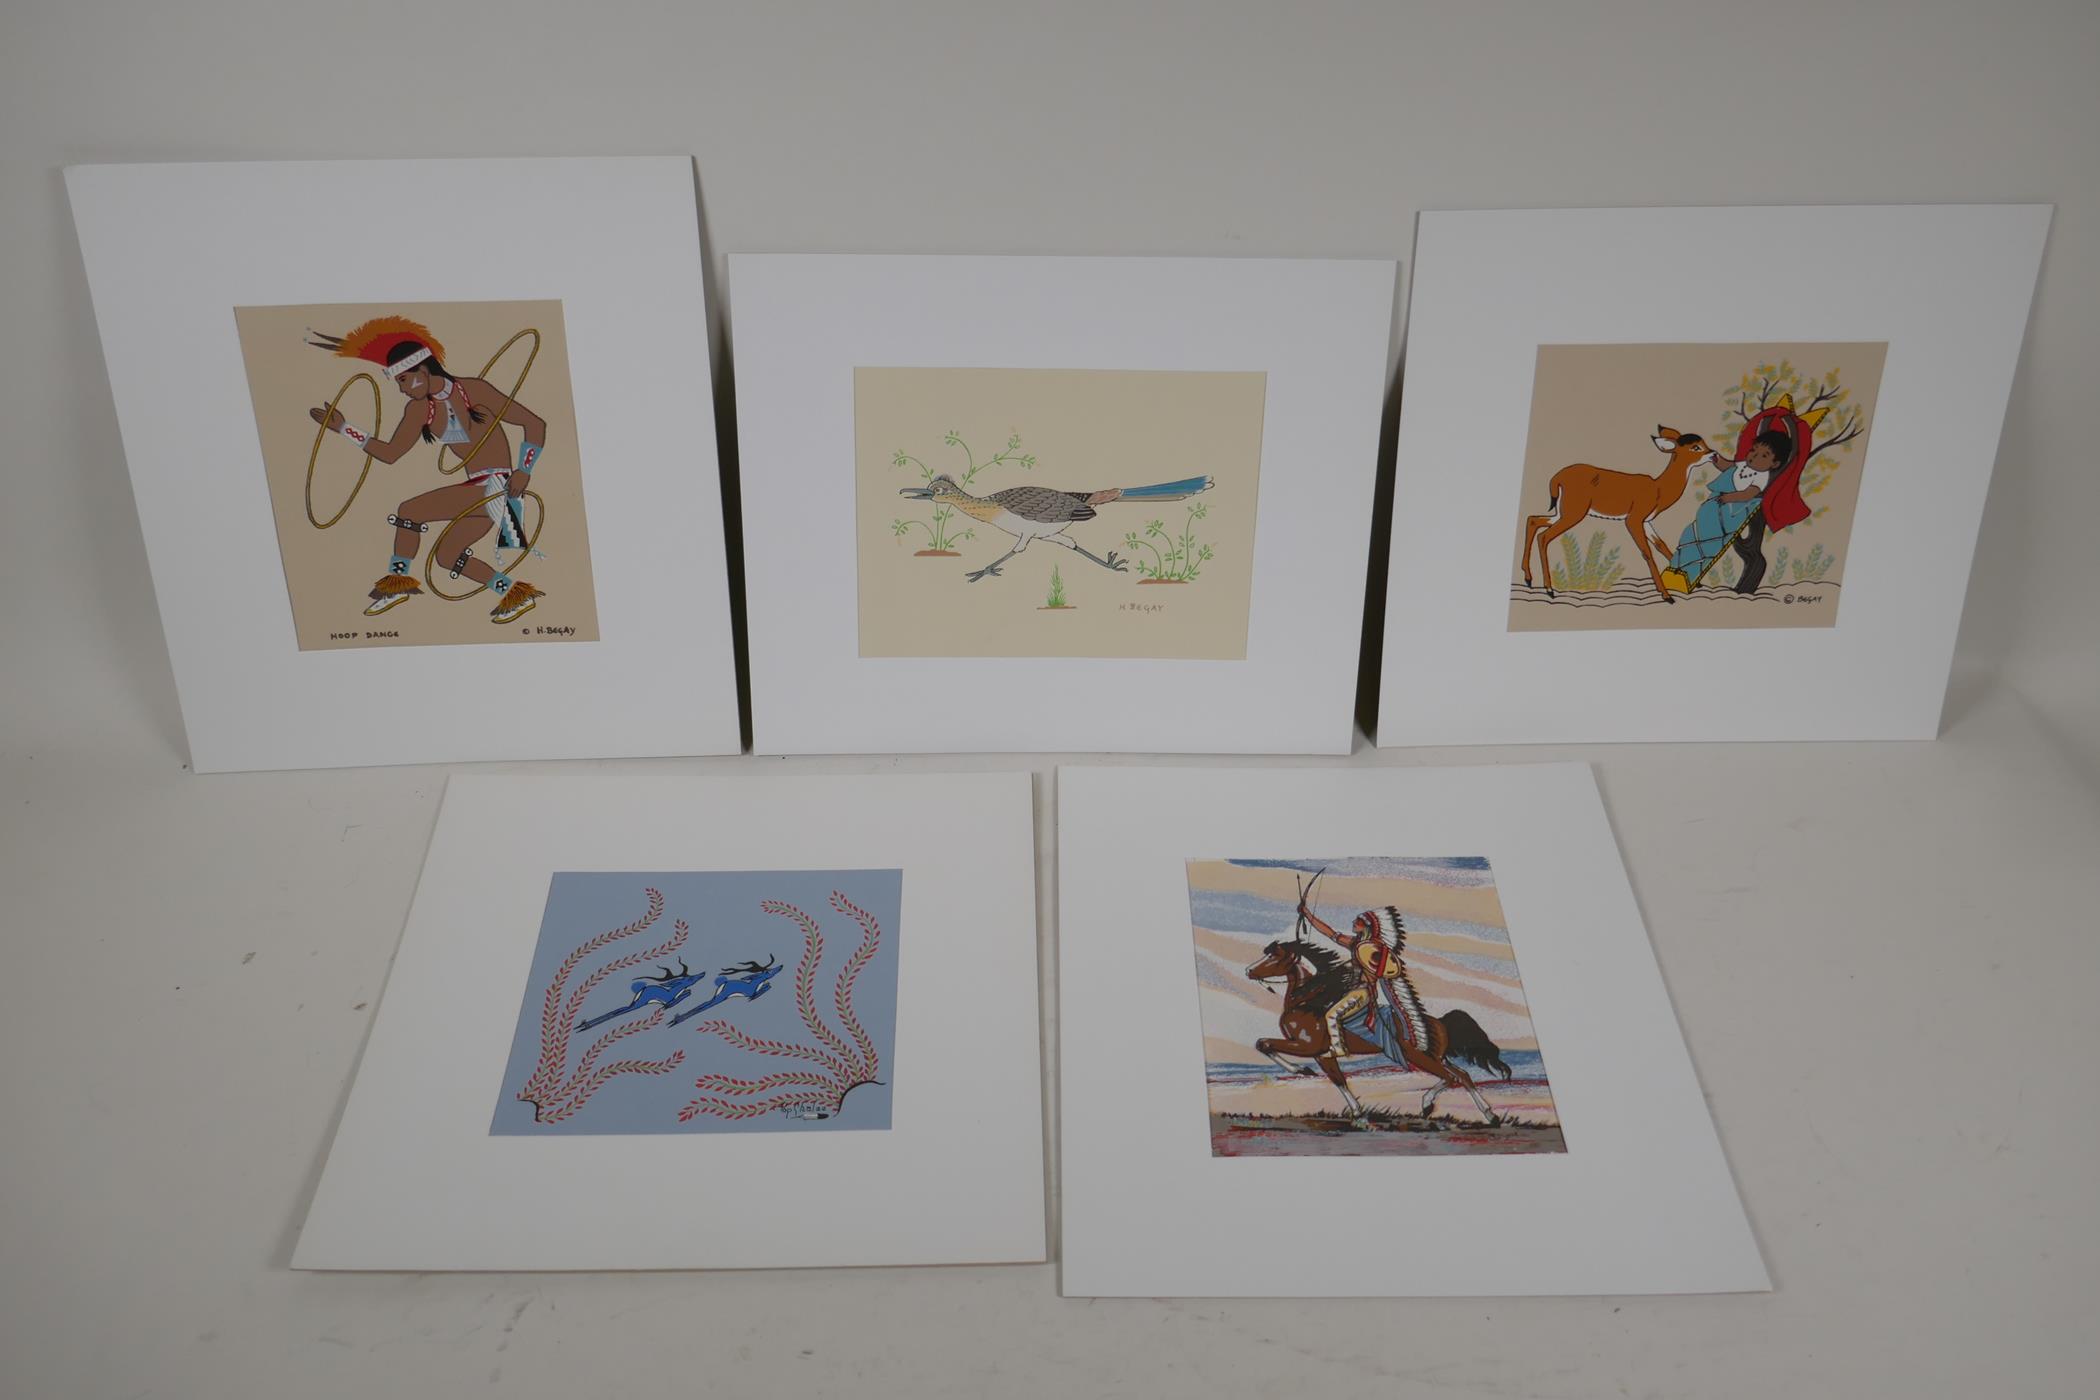 Harrison Begay, Navajo artist, four screen prints by Tewa Santa Fe, Mexico, and another by Pop